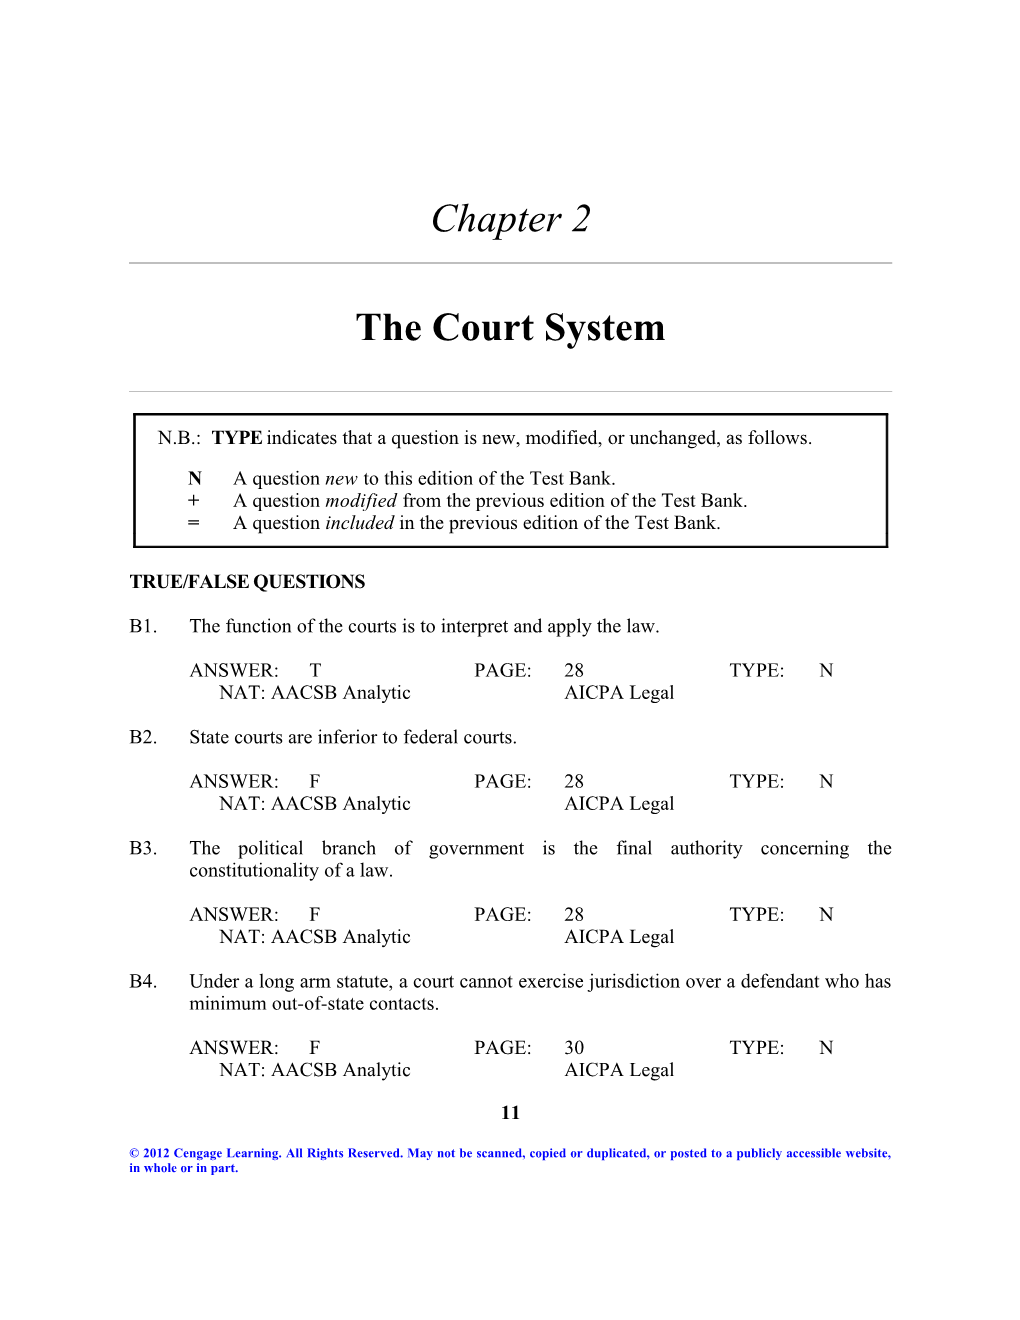 Chapter 2: the Court System 1